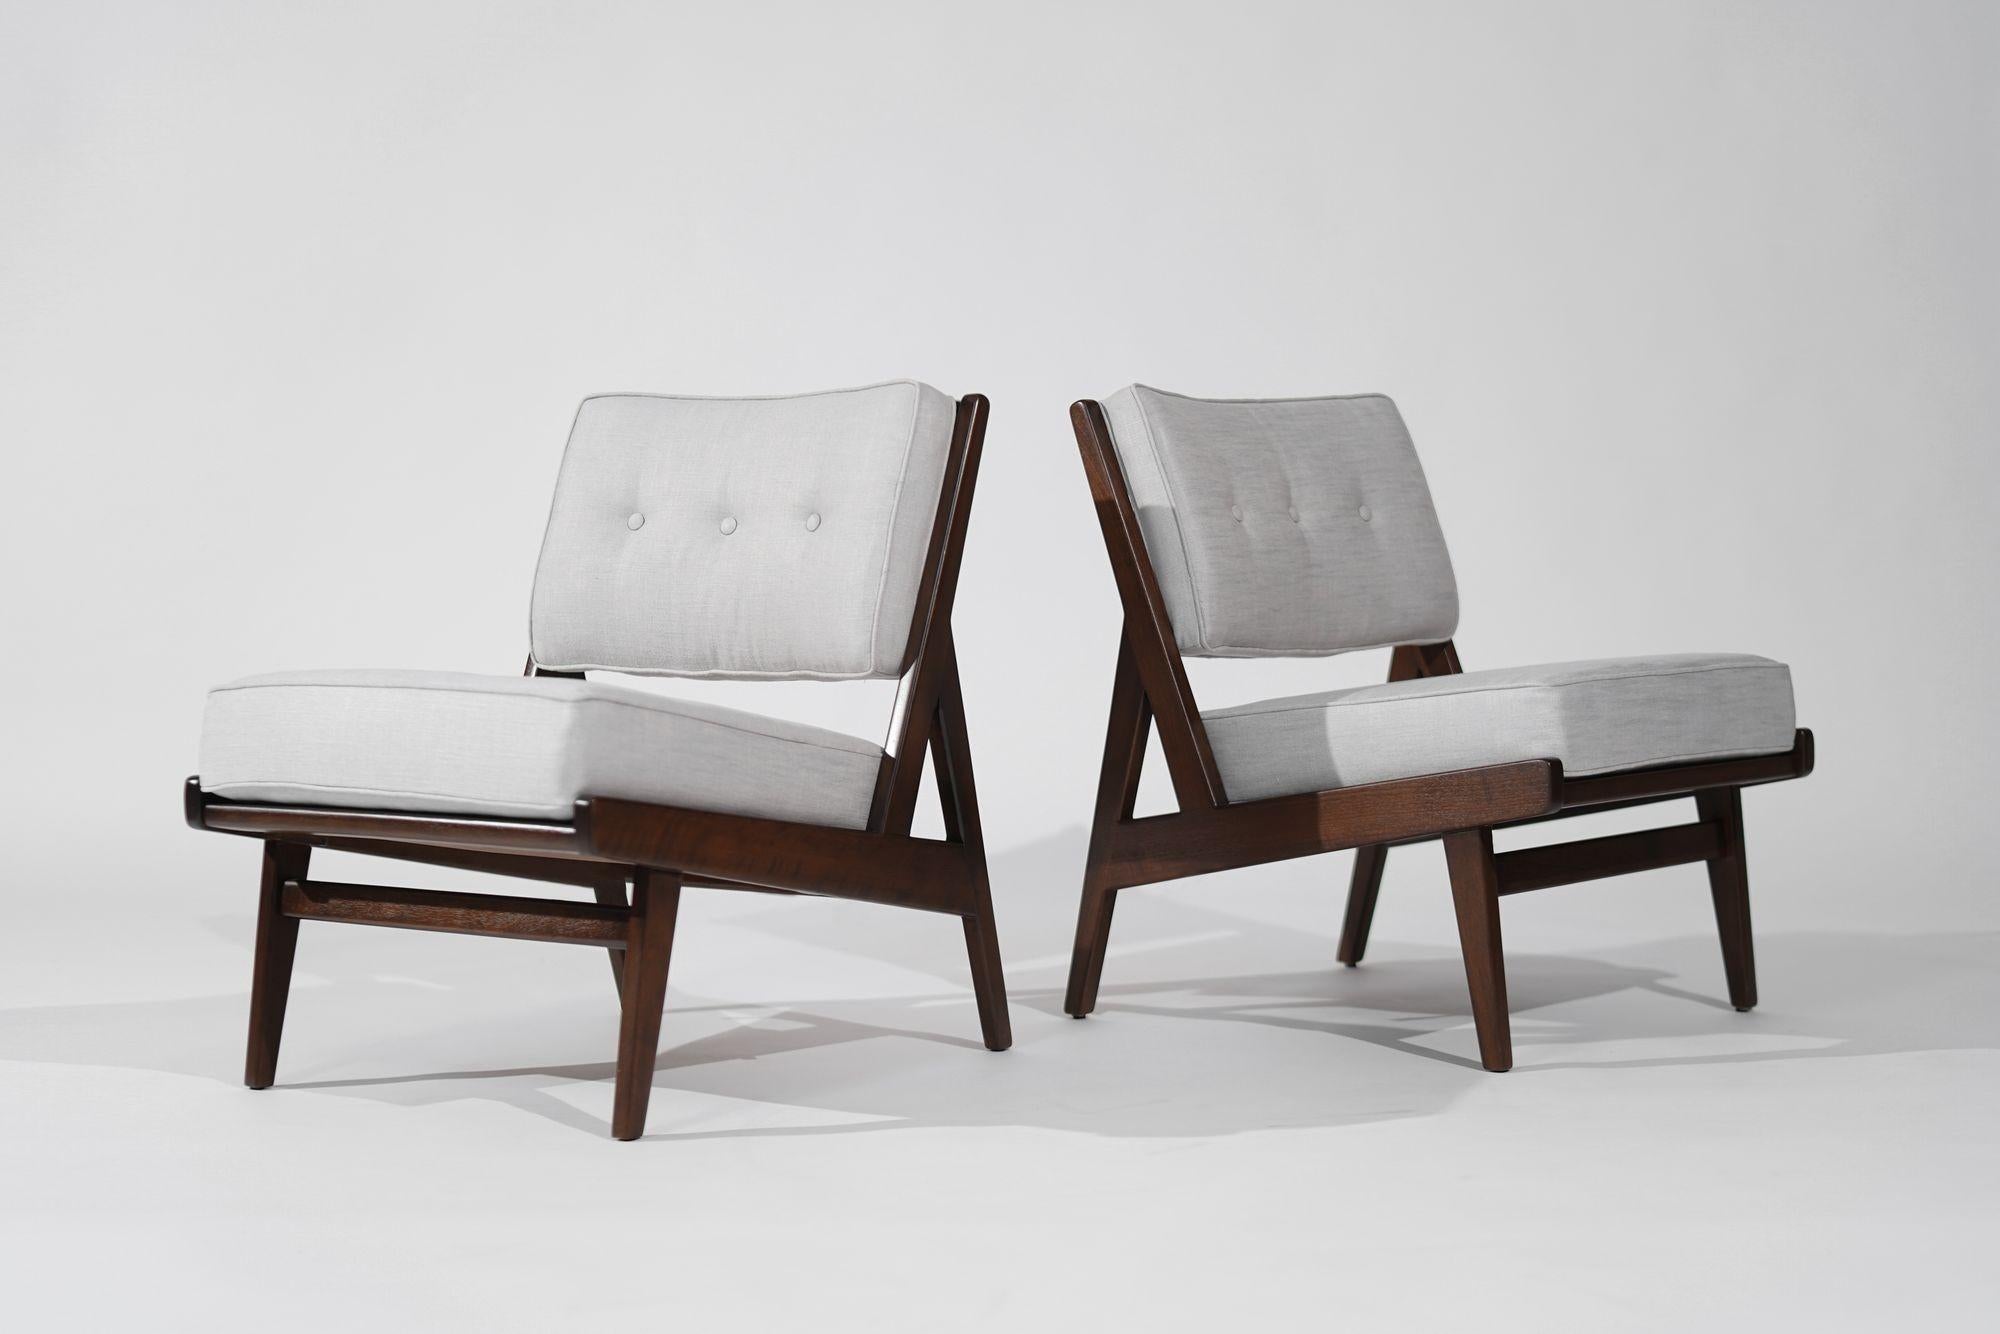 20th Century Rare Slipper Chairs by Jens Risom for Risom, Inc. C. 1950s For Sale